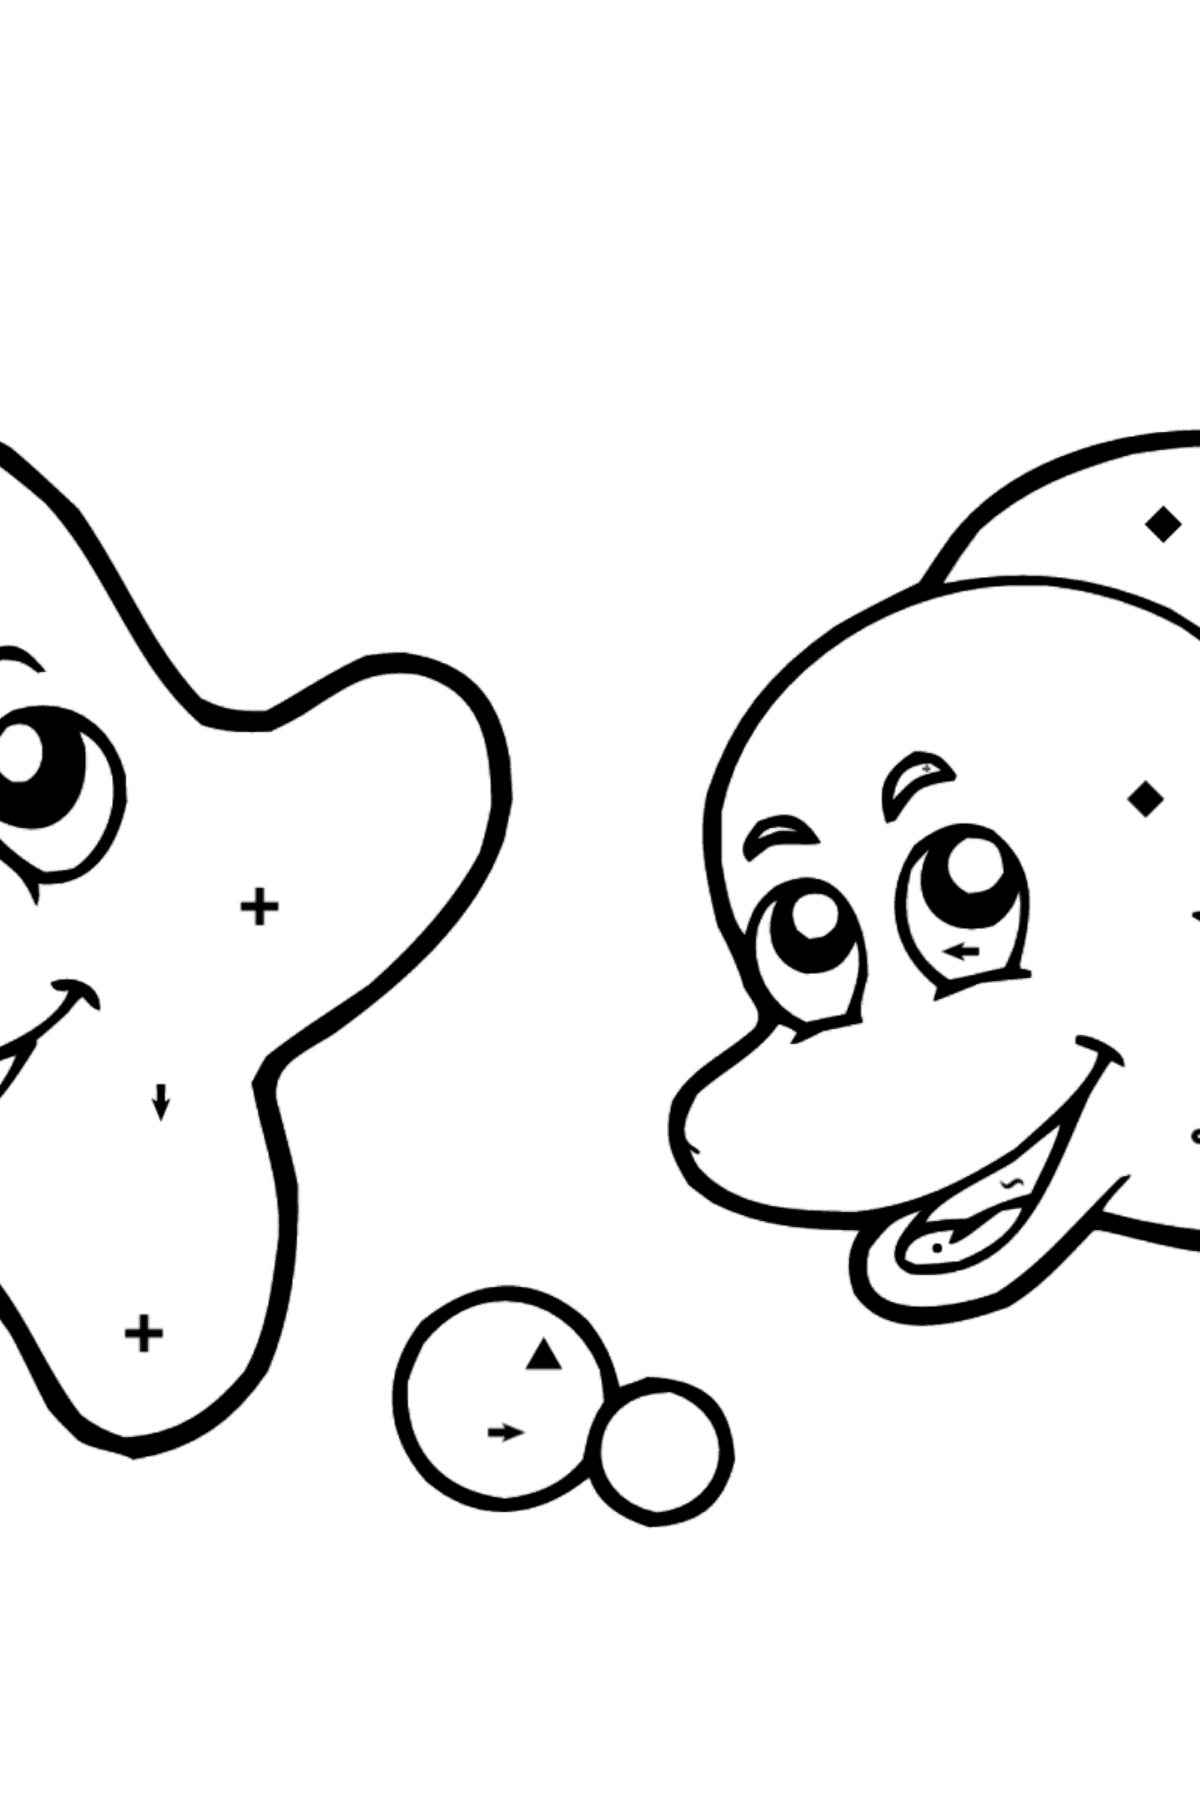 Dolphin and Starfish Coloring page - Coloring by Symbols for Kids